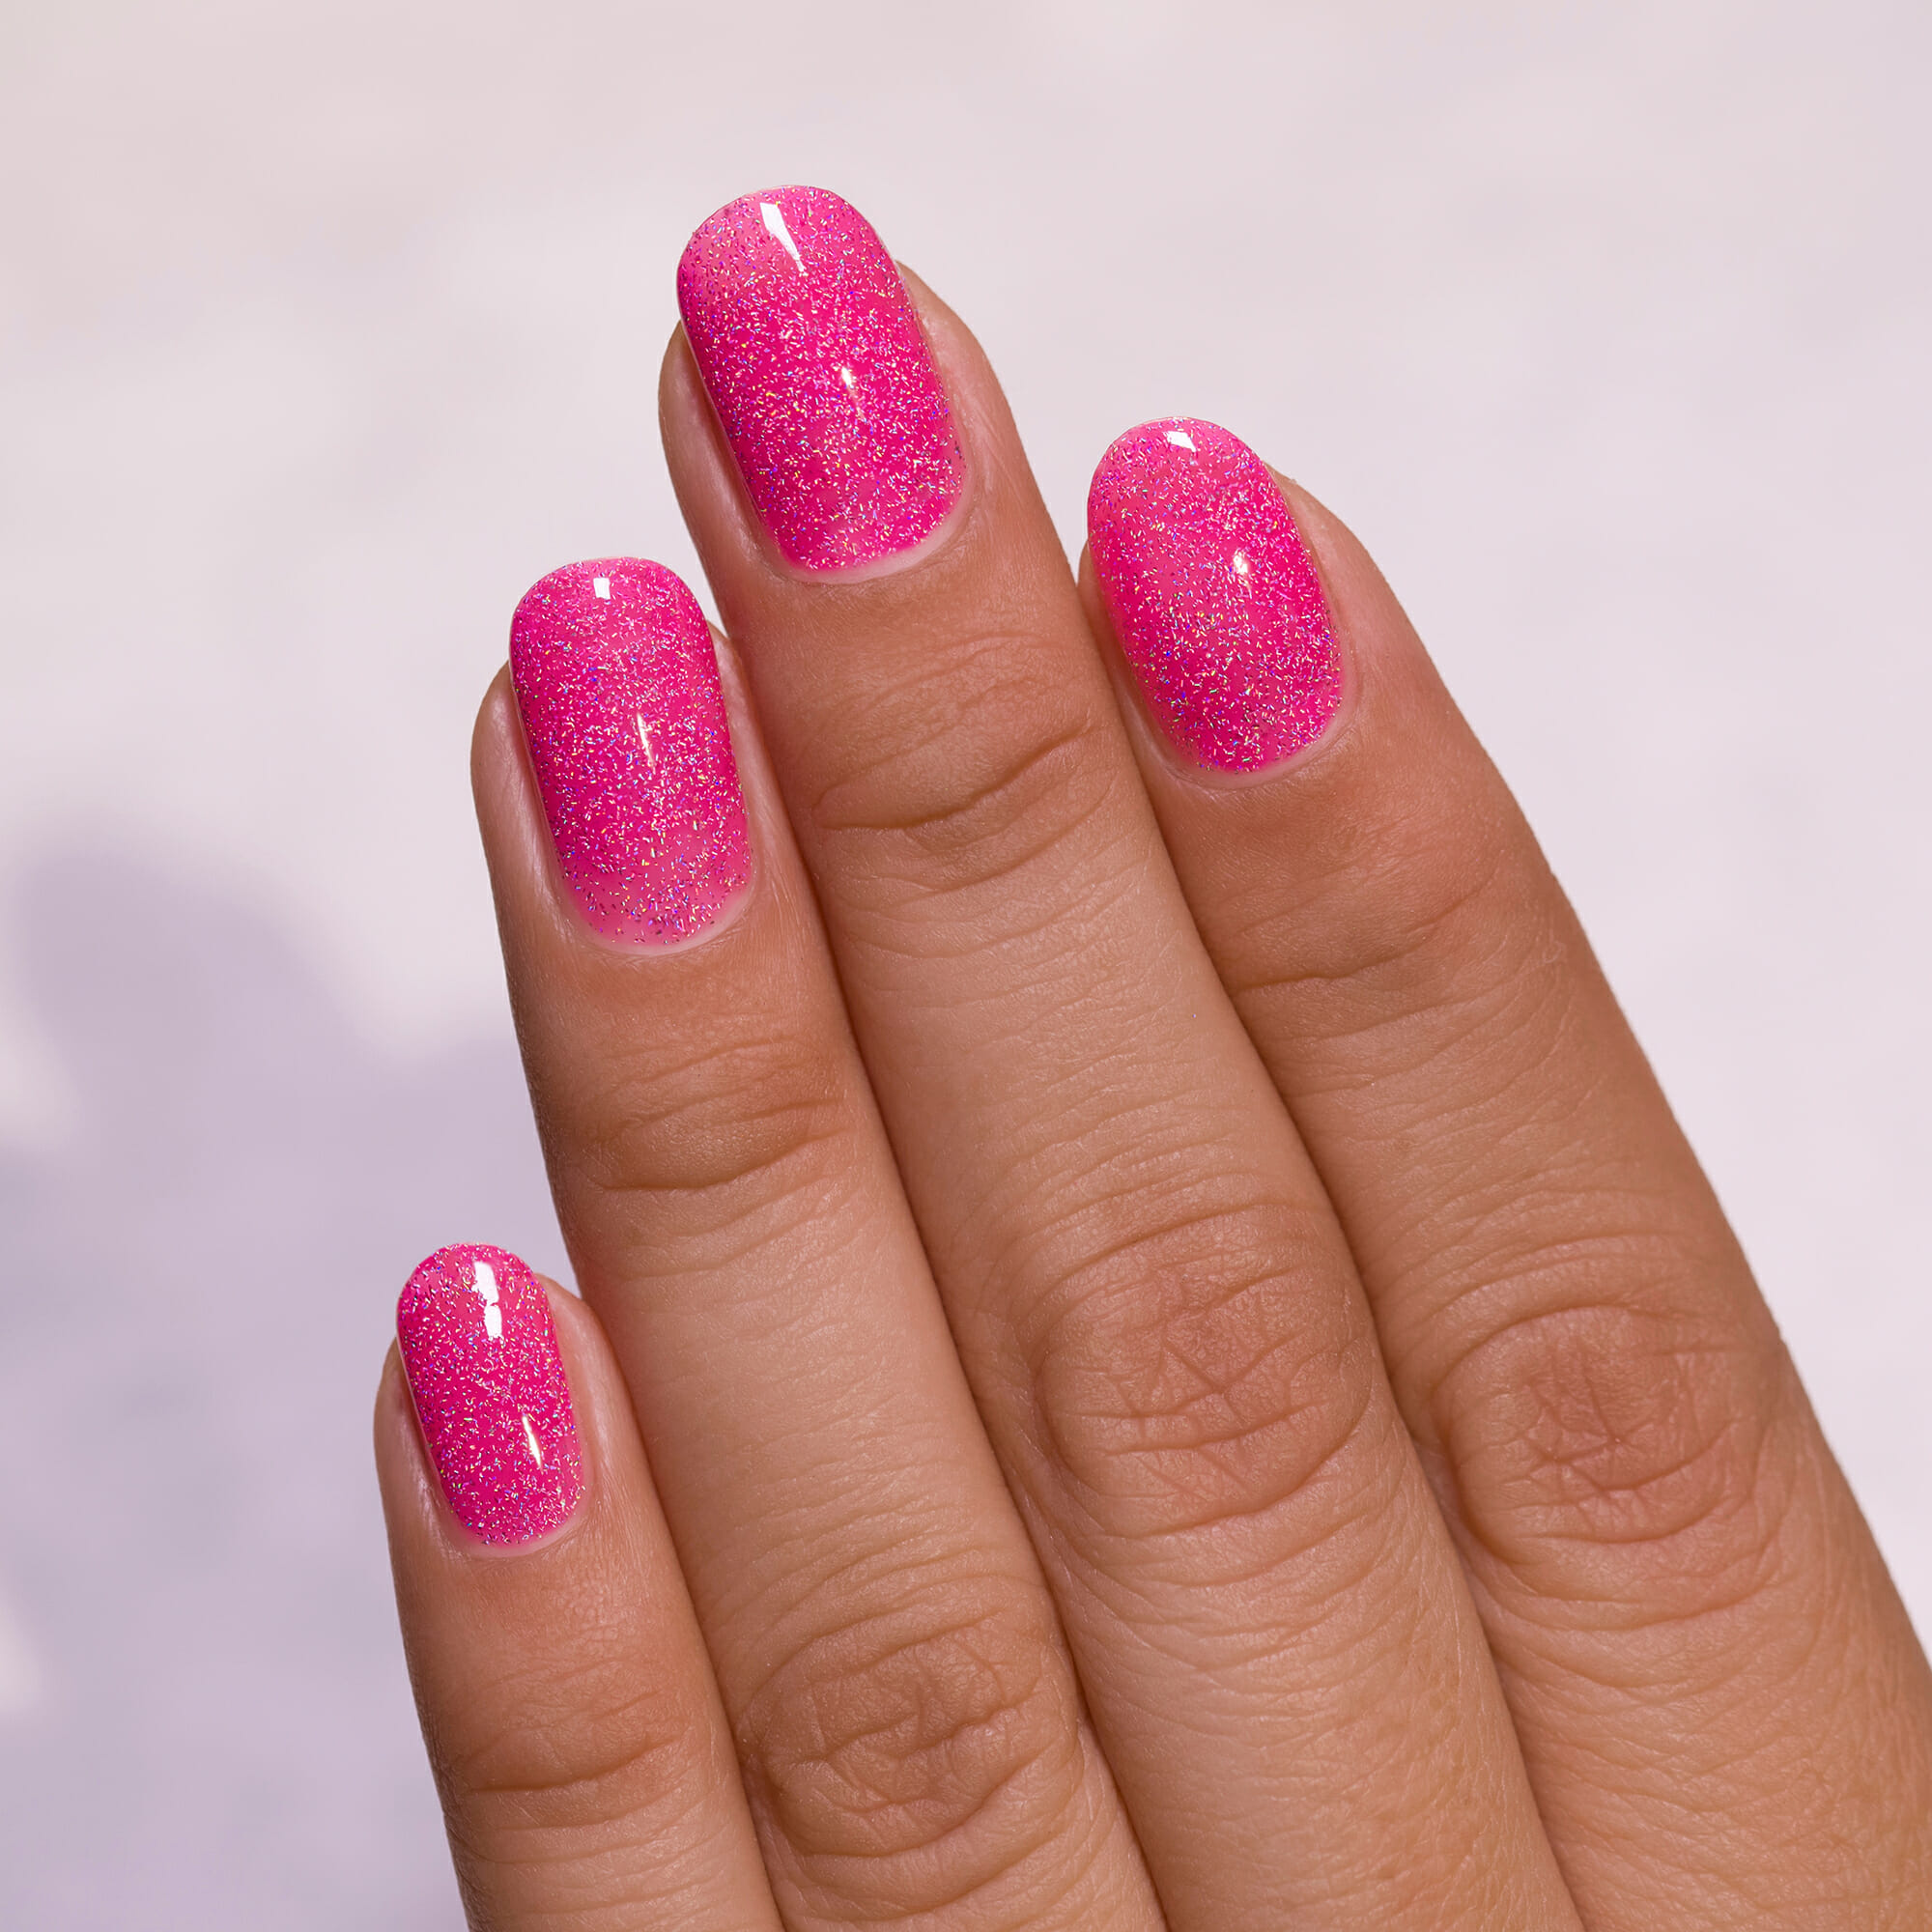 Misbehaving - Vivid Neon Pink Holographic Sheer Jelly Nail Polish by ILNP